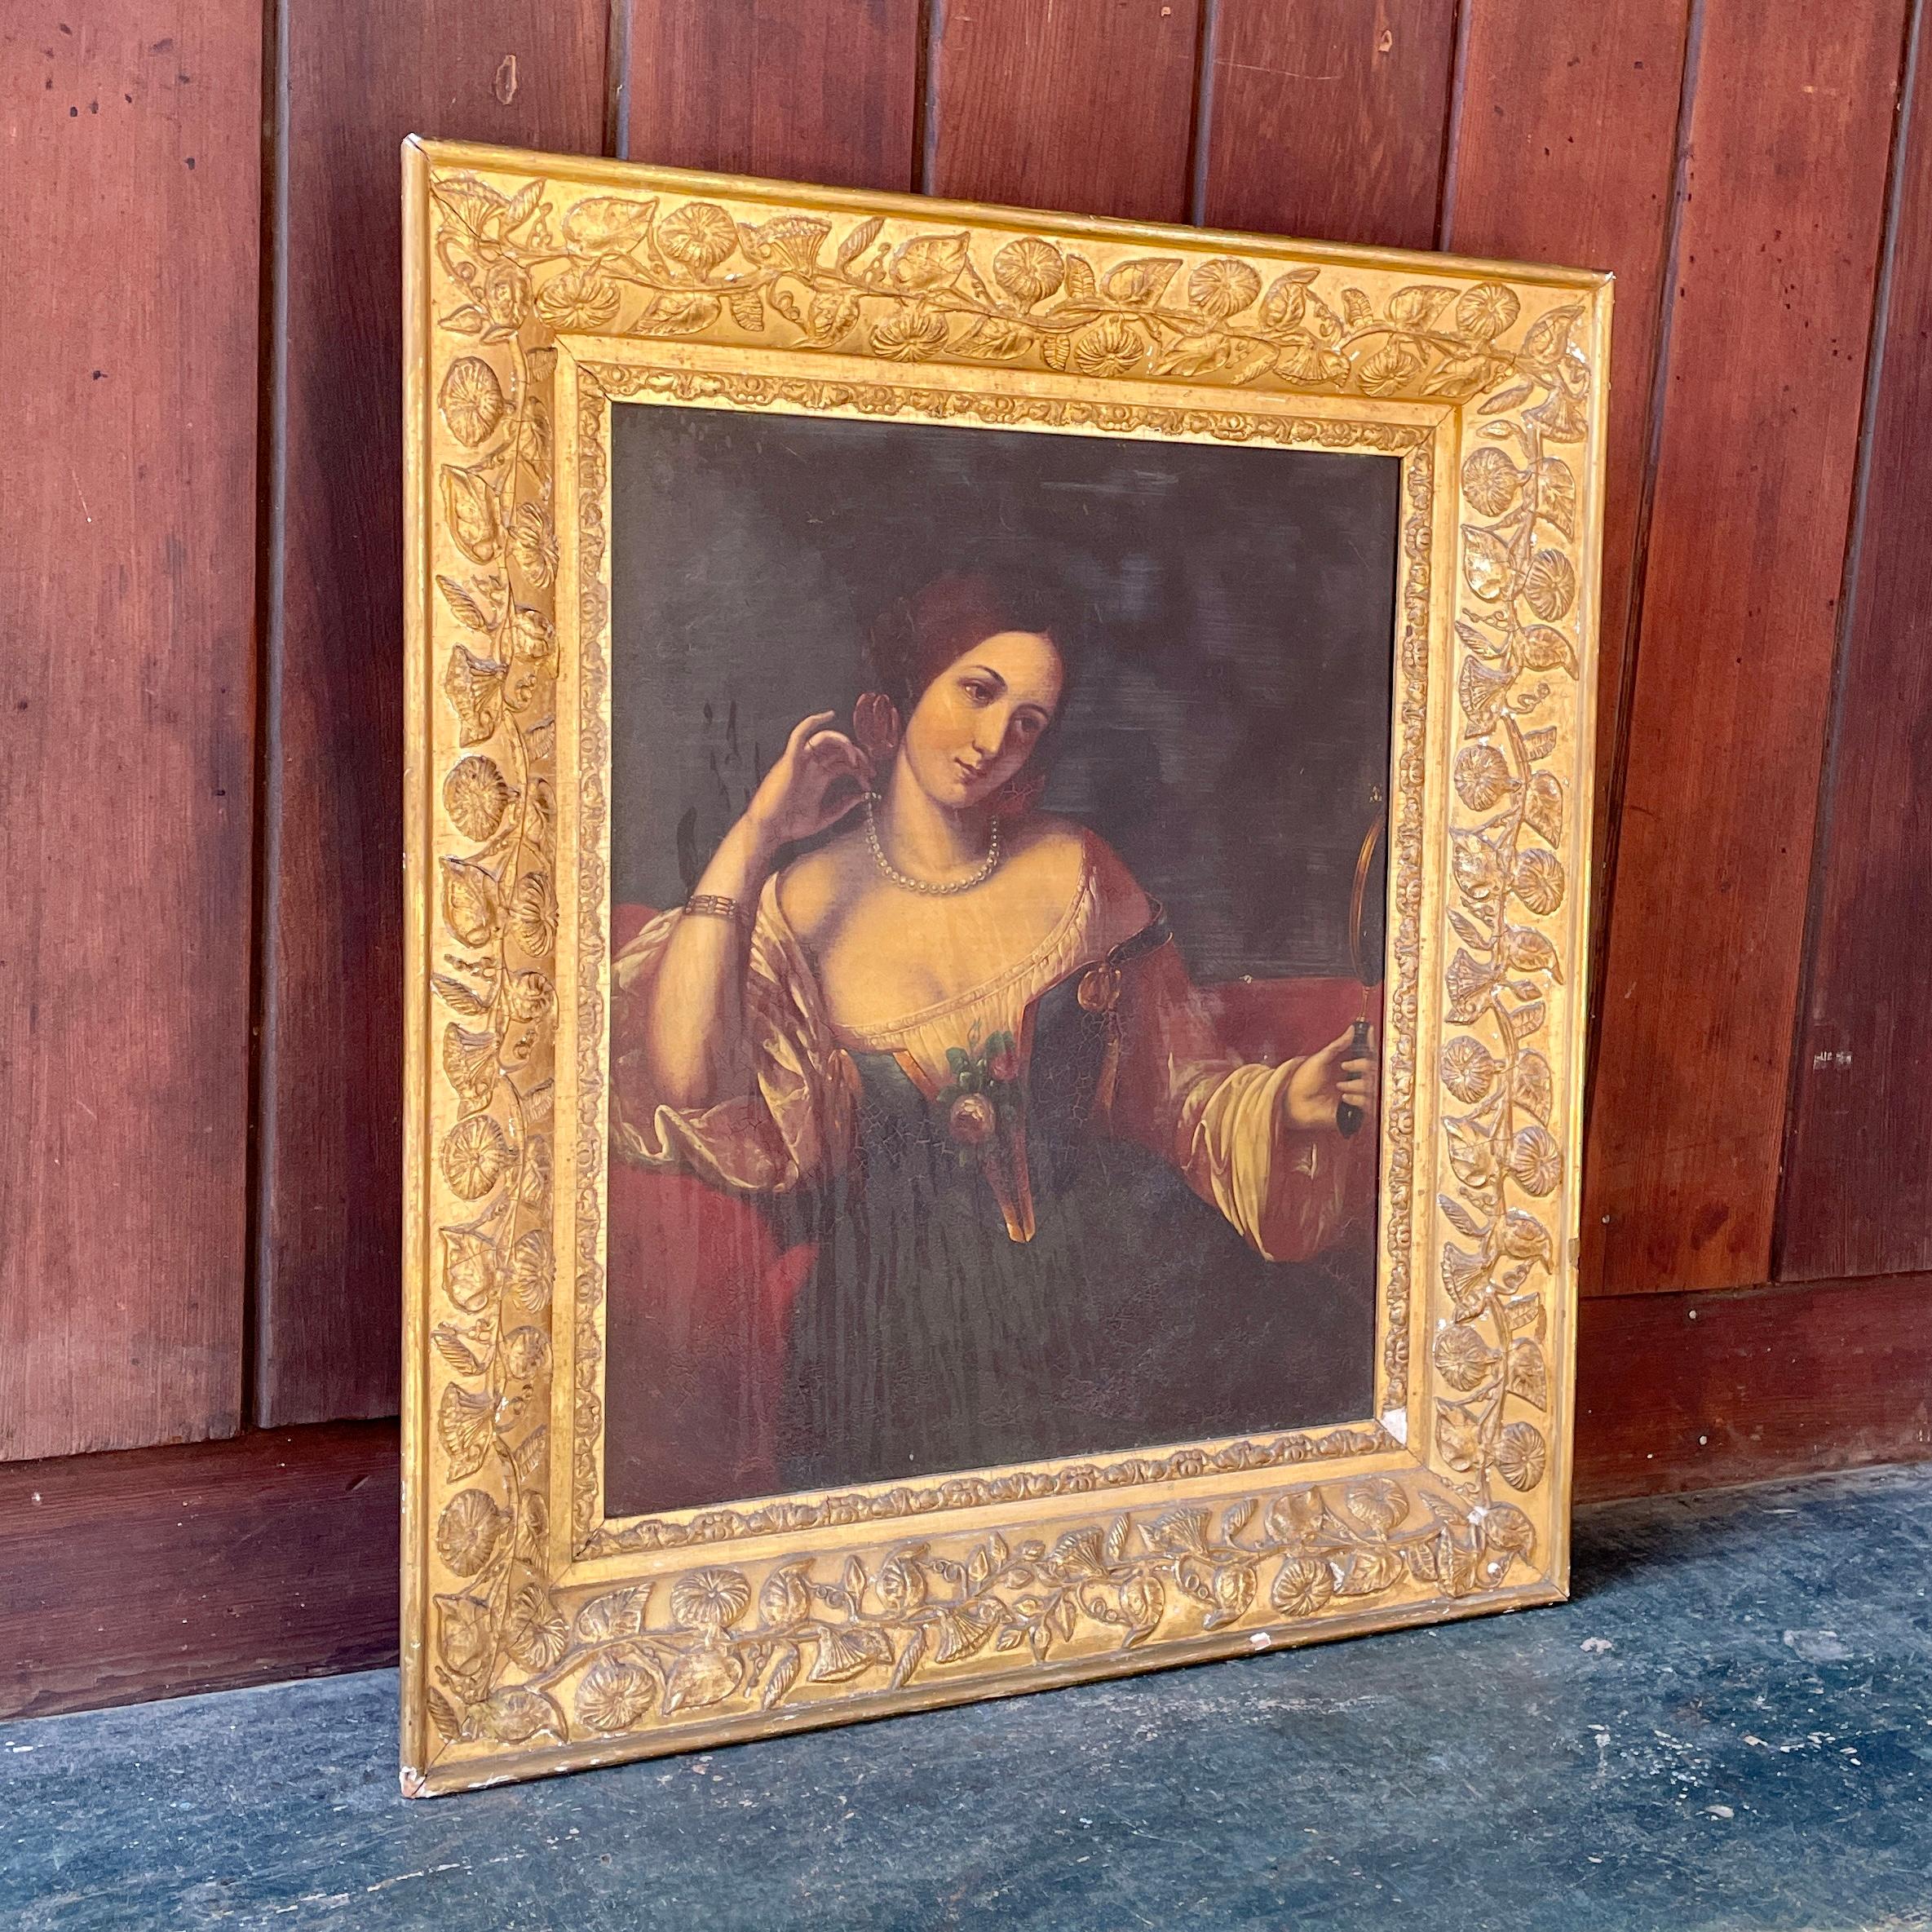 A masterful painting on tin in possibly original gilded frame, by an unknown artist.  We unfortunately have no provenance or further information. Unrestored with soiling and mostly translucent stains to surface of painting.

Frame W 22.25 x H 25.5